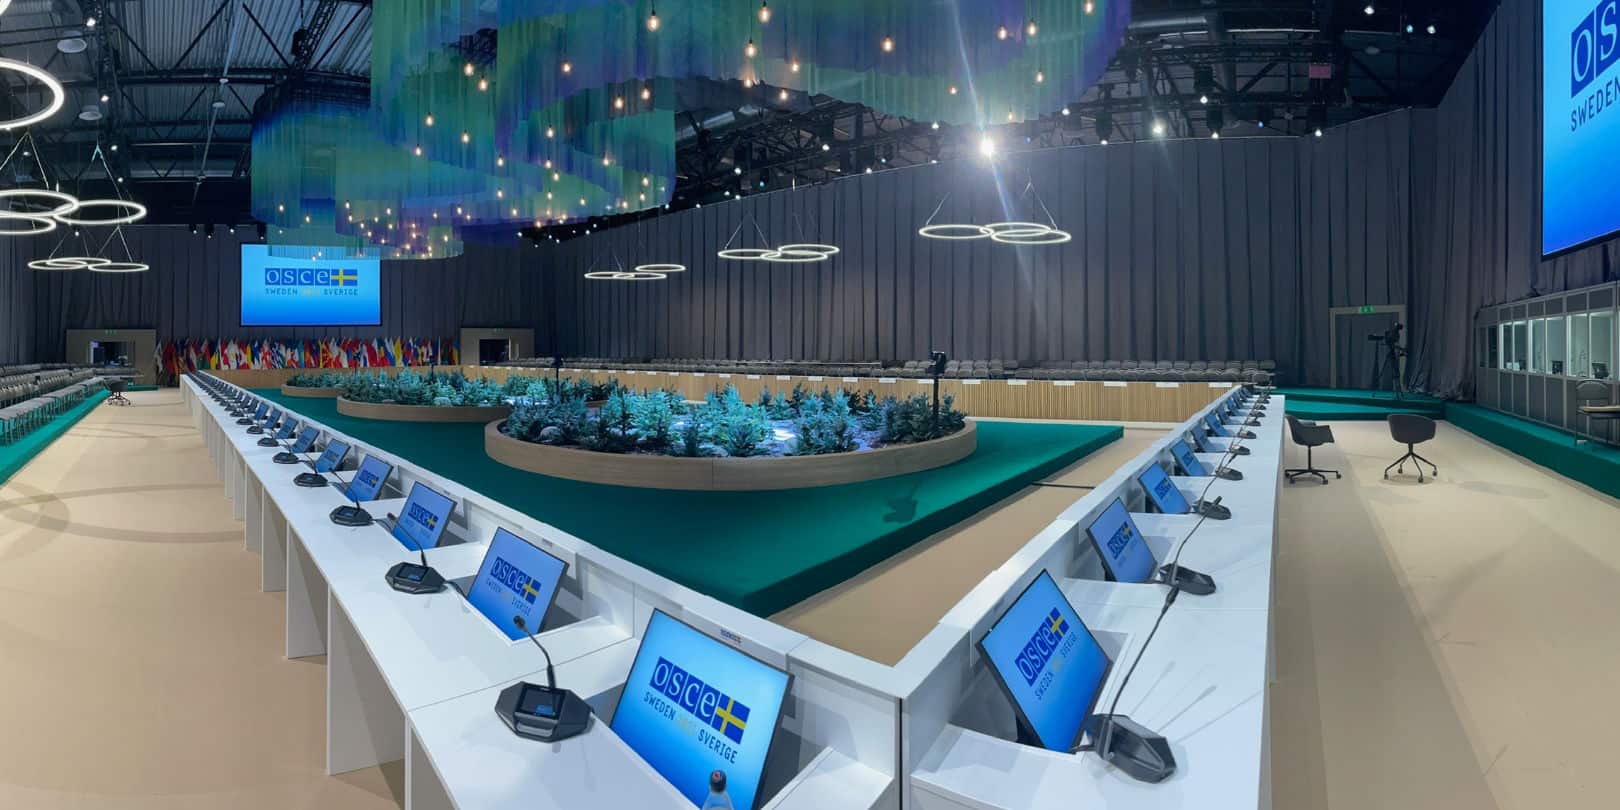 BOSCH Dicentis microphones used at conference